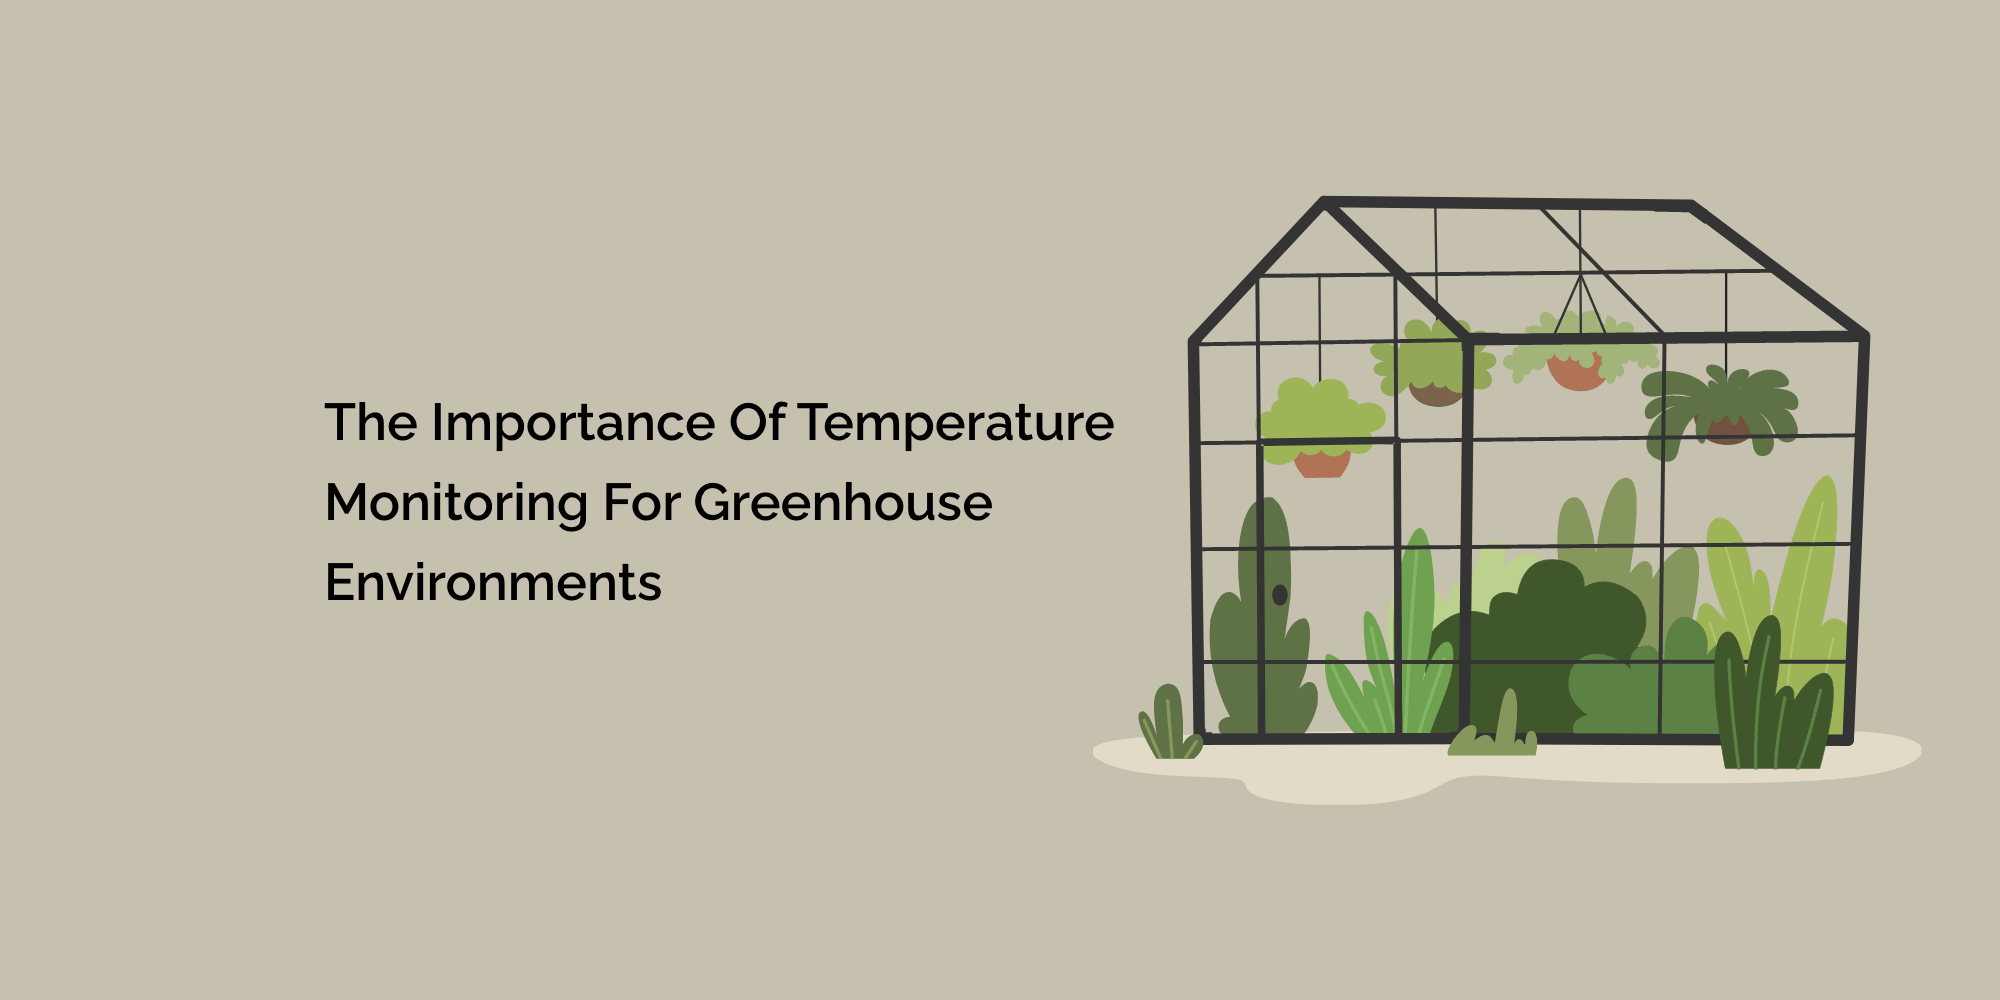 The Importance of Temperature Monitoring for Greenhouse Environments